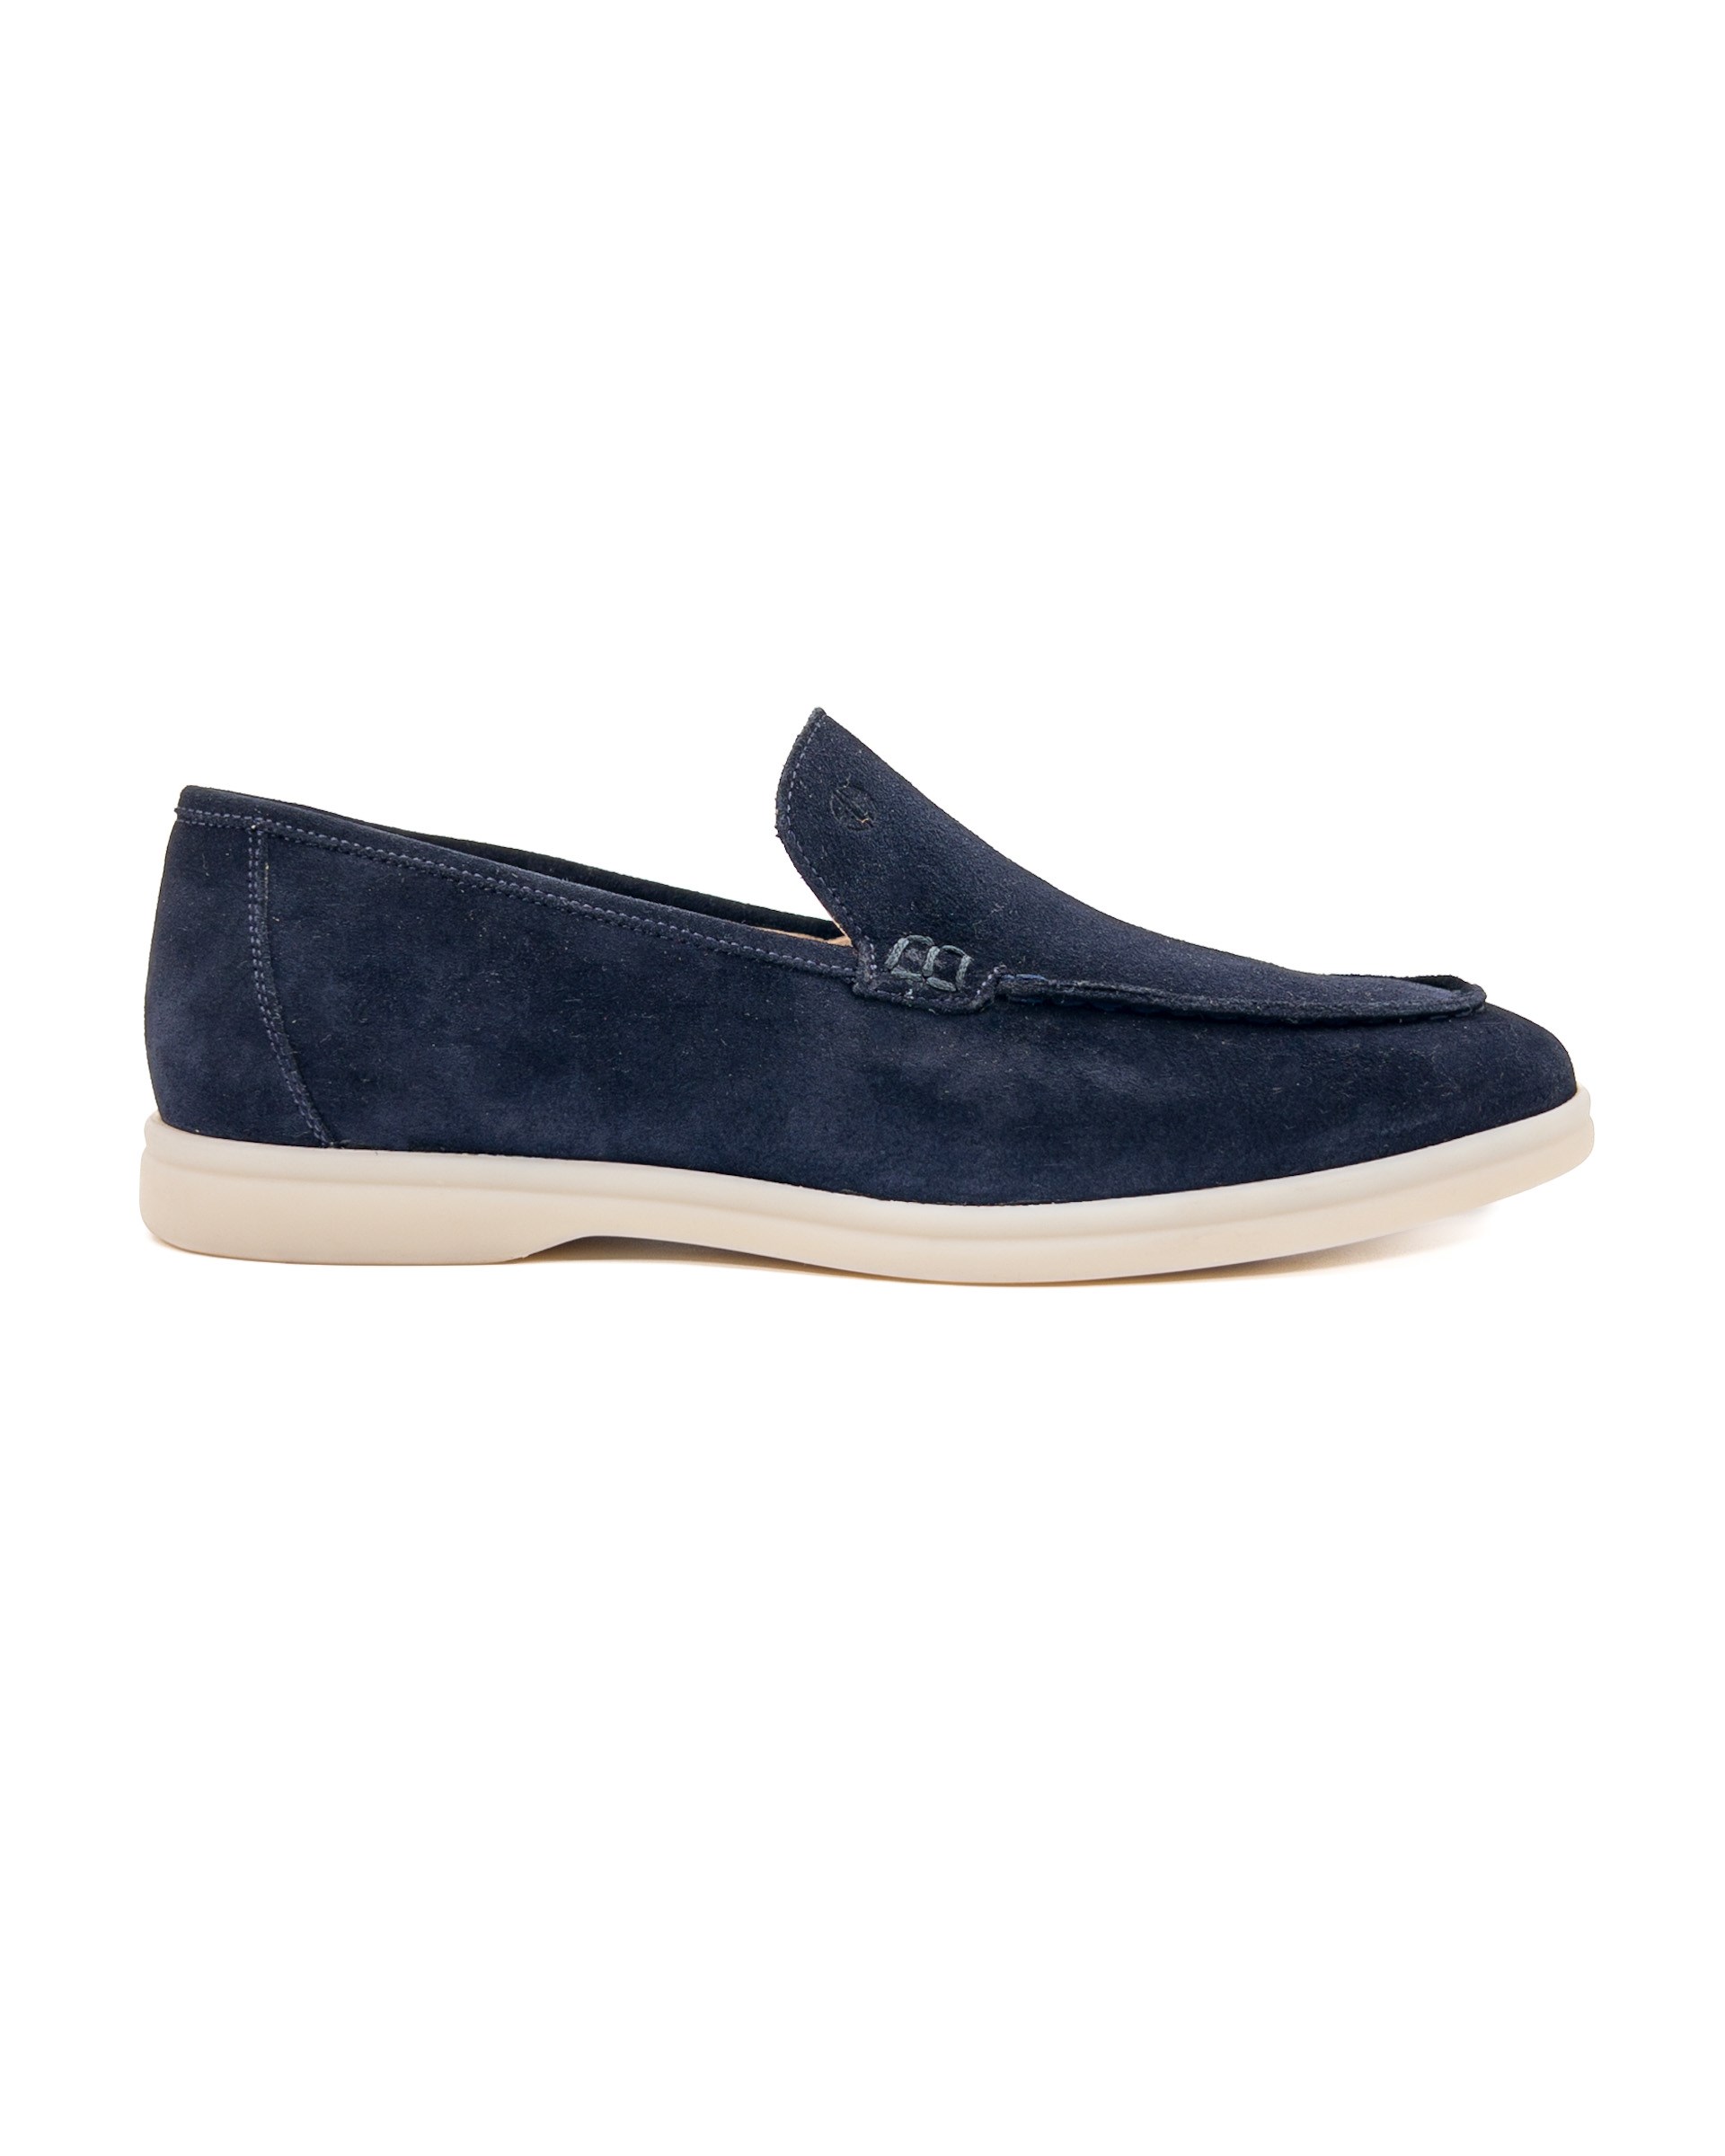 Allegro Navy Blue Genuine Suede Men's Loafers | Tezcan Shoes